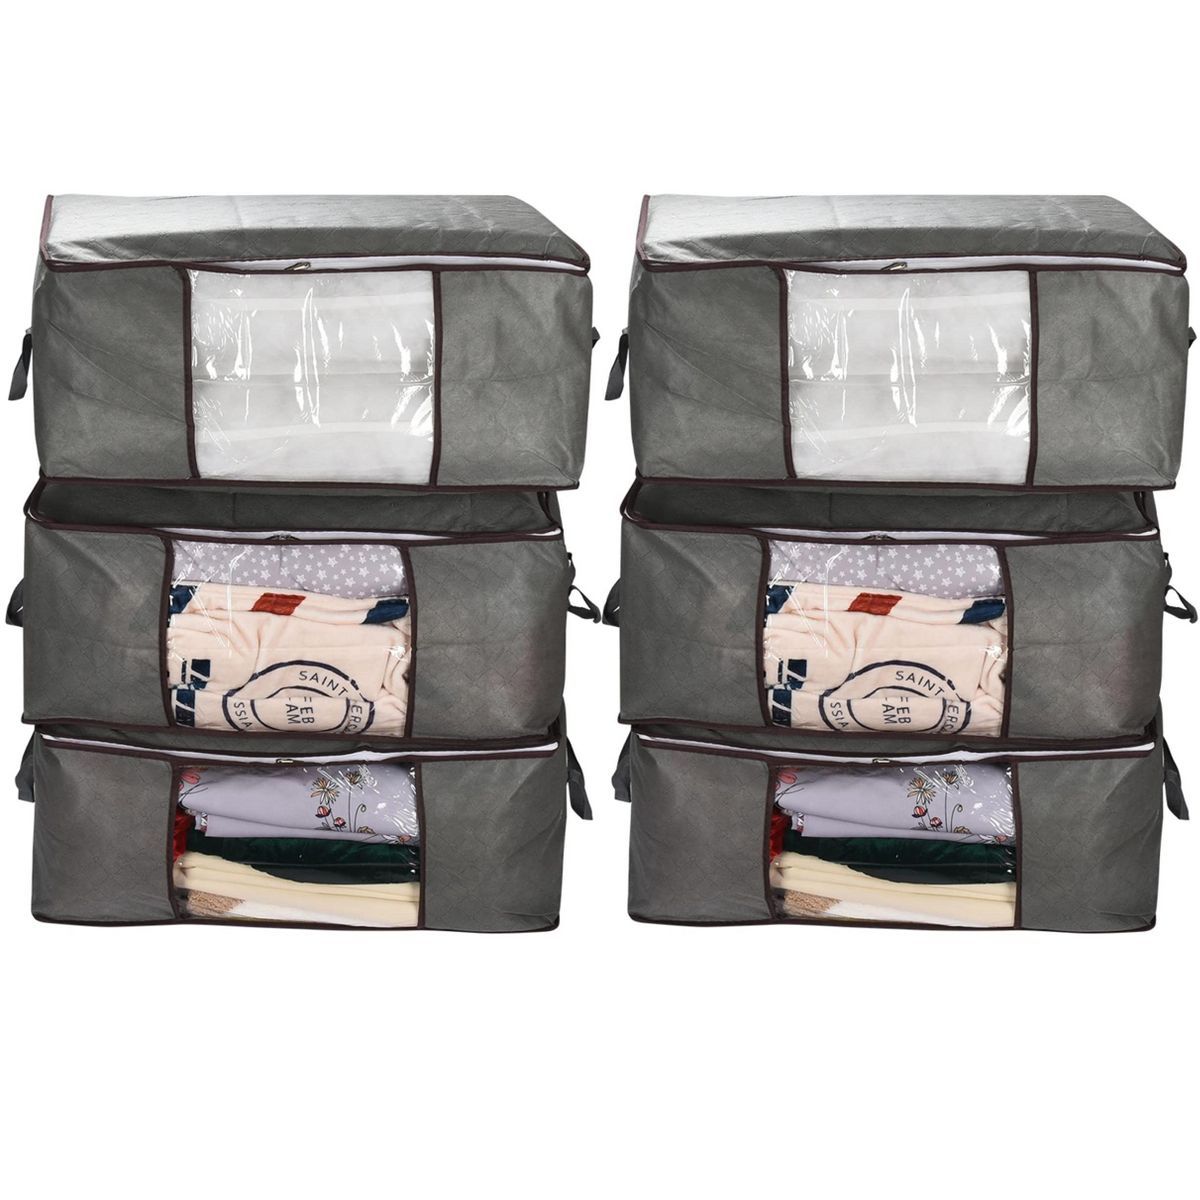 Silvon Storage Organizer for Folded Clothes and Winter Blankets - Gray | Target